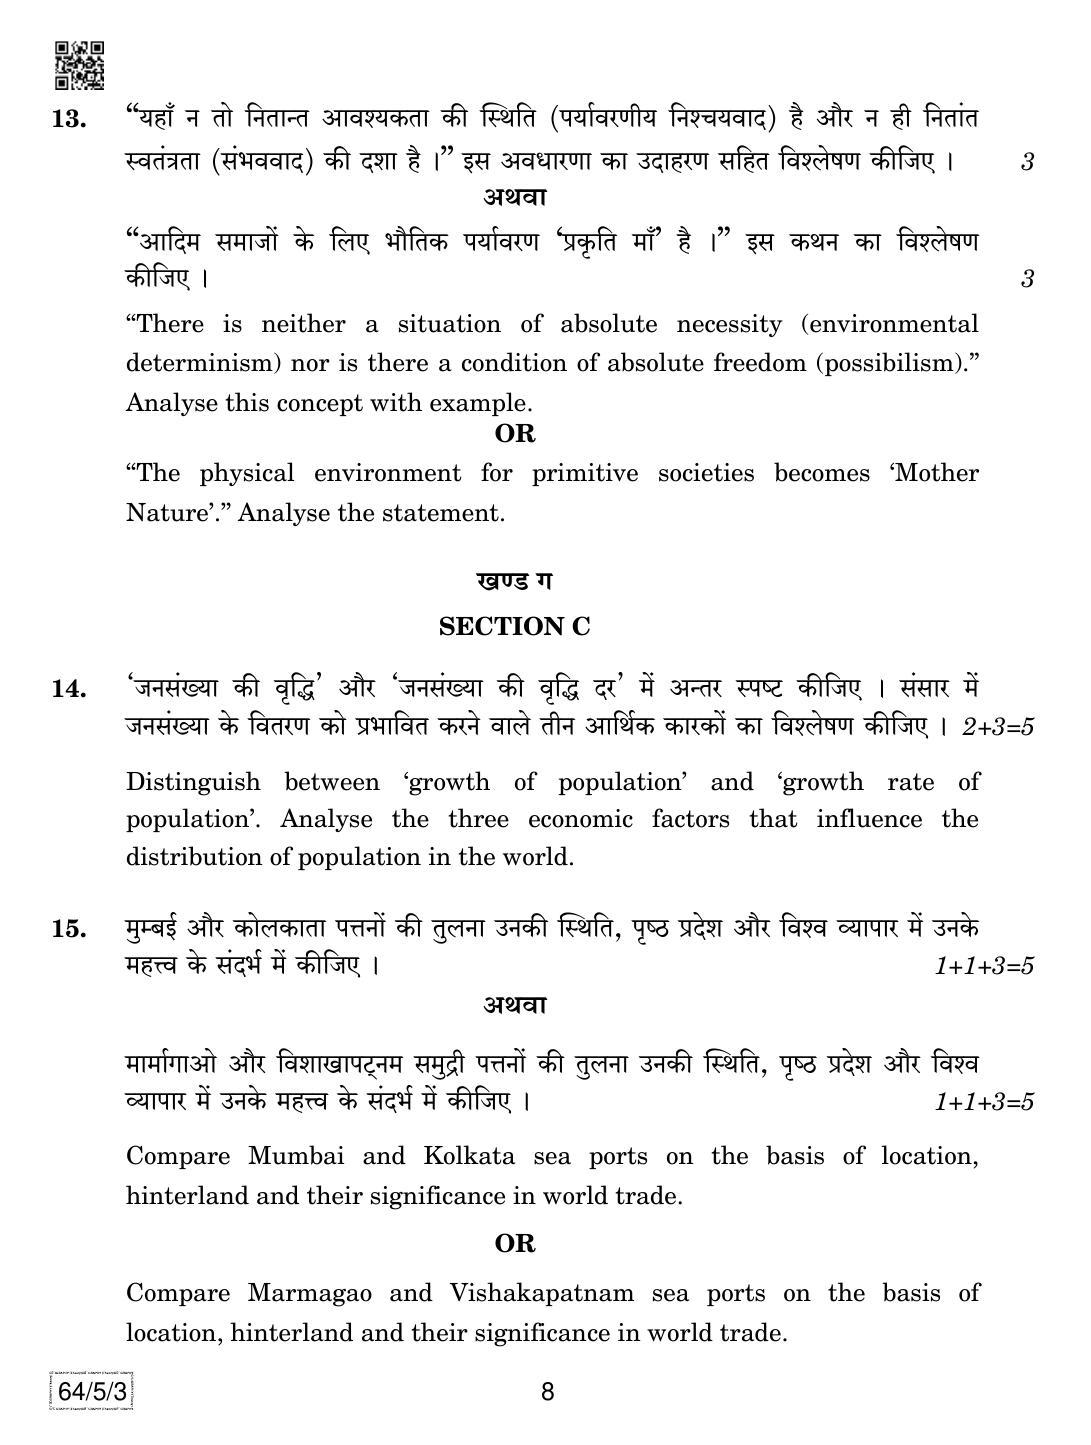 CBSE Class 12 64-5-3 Geography 2019 Question Paper - Page 8